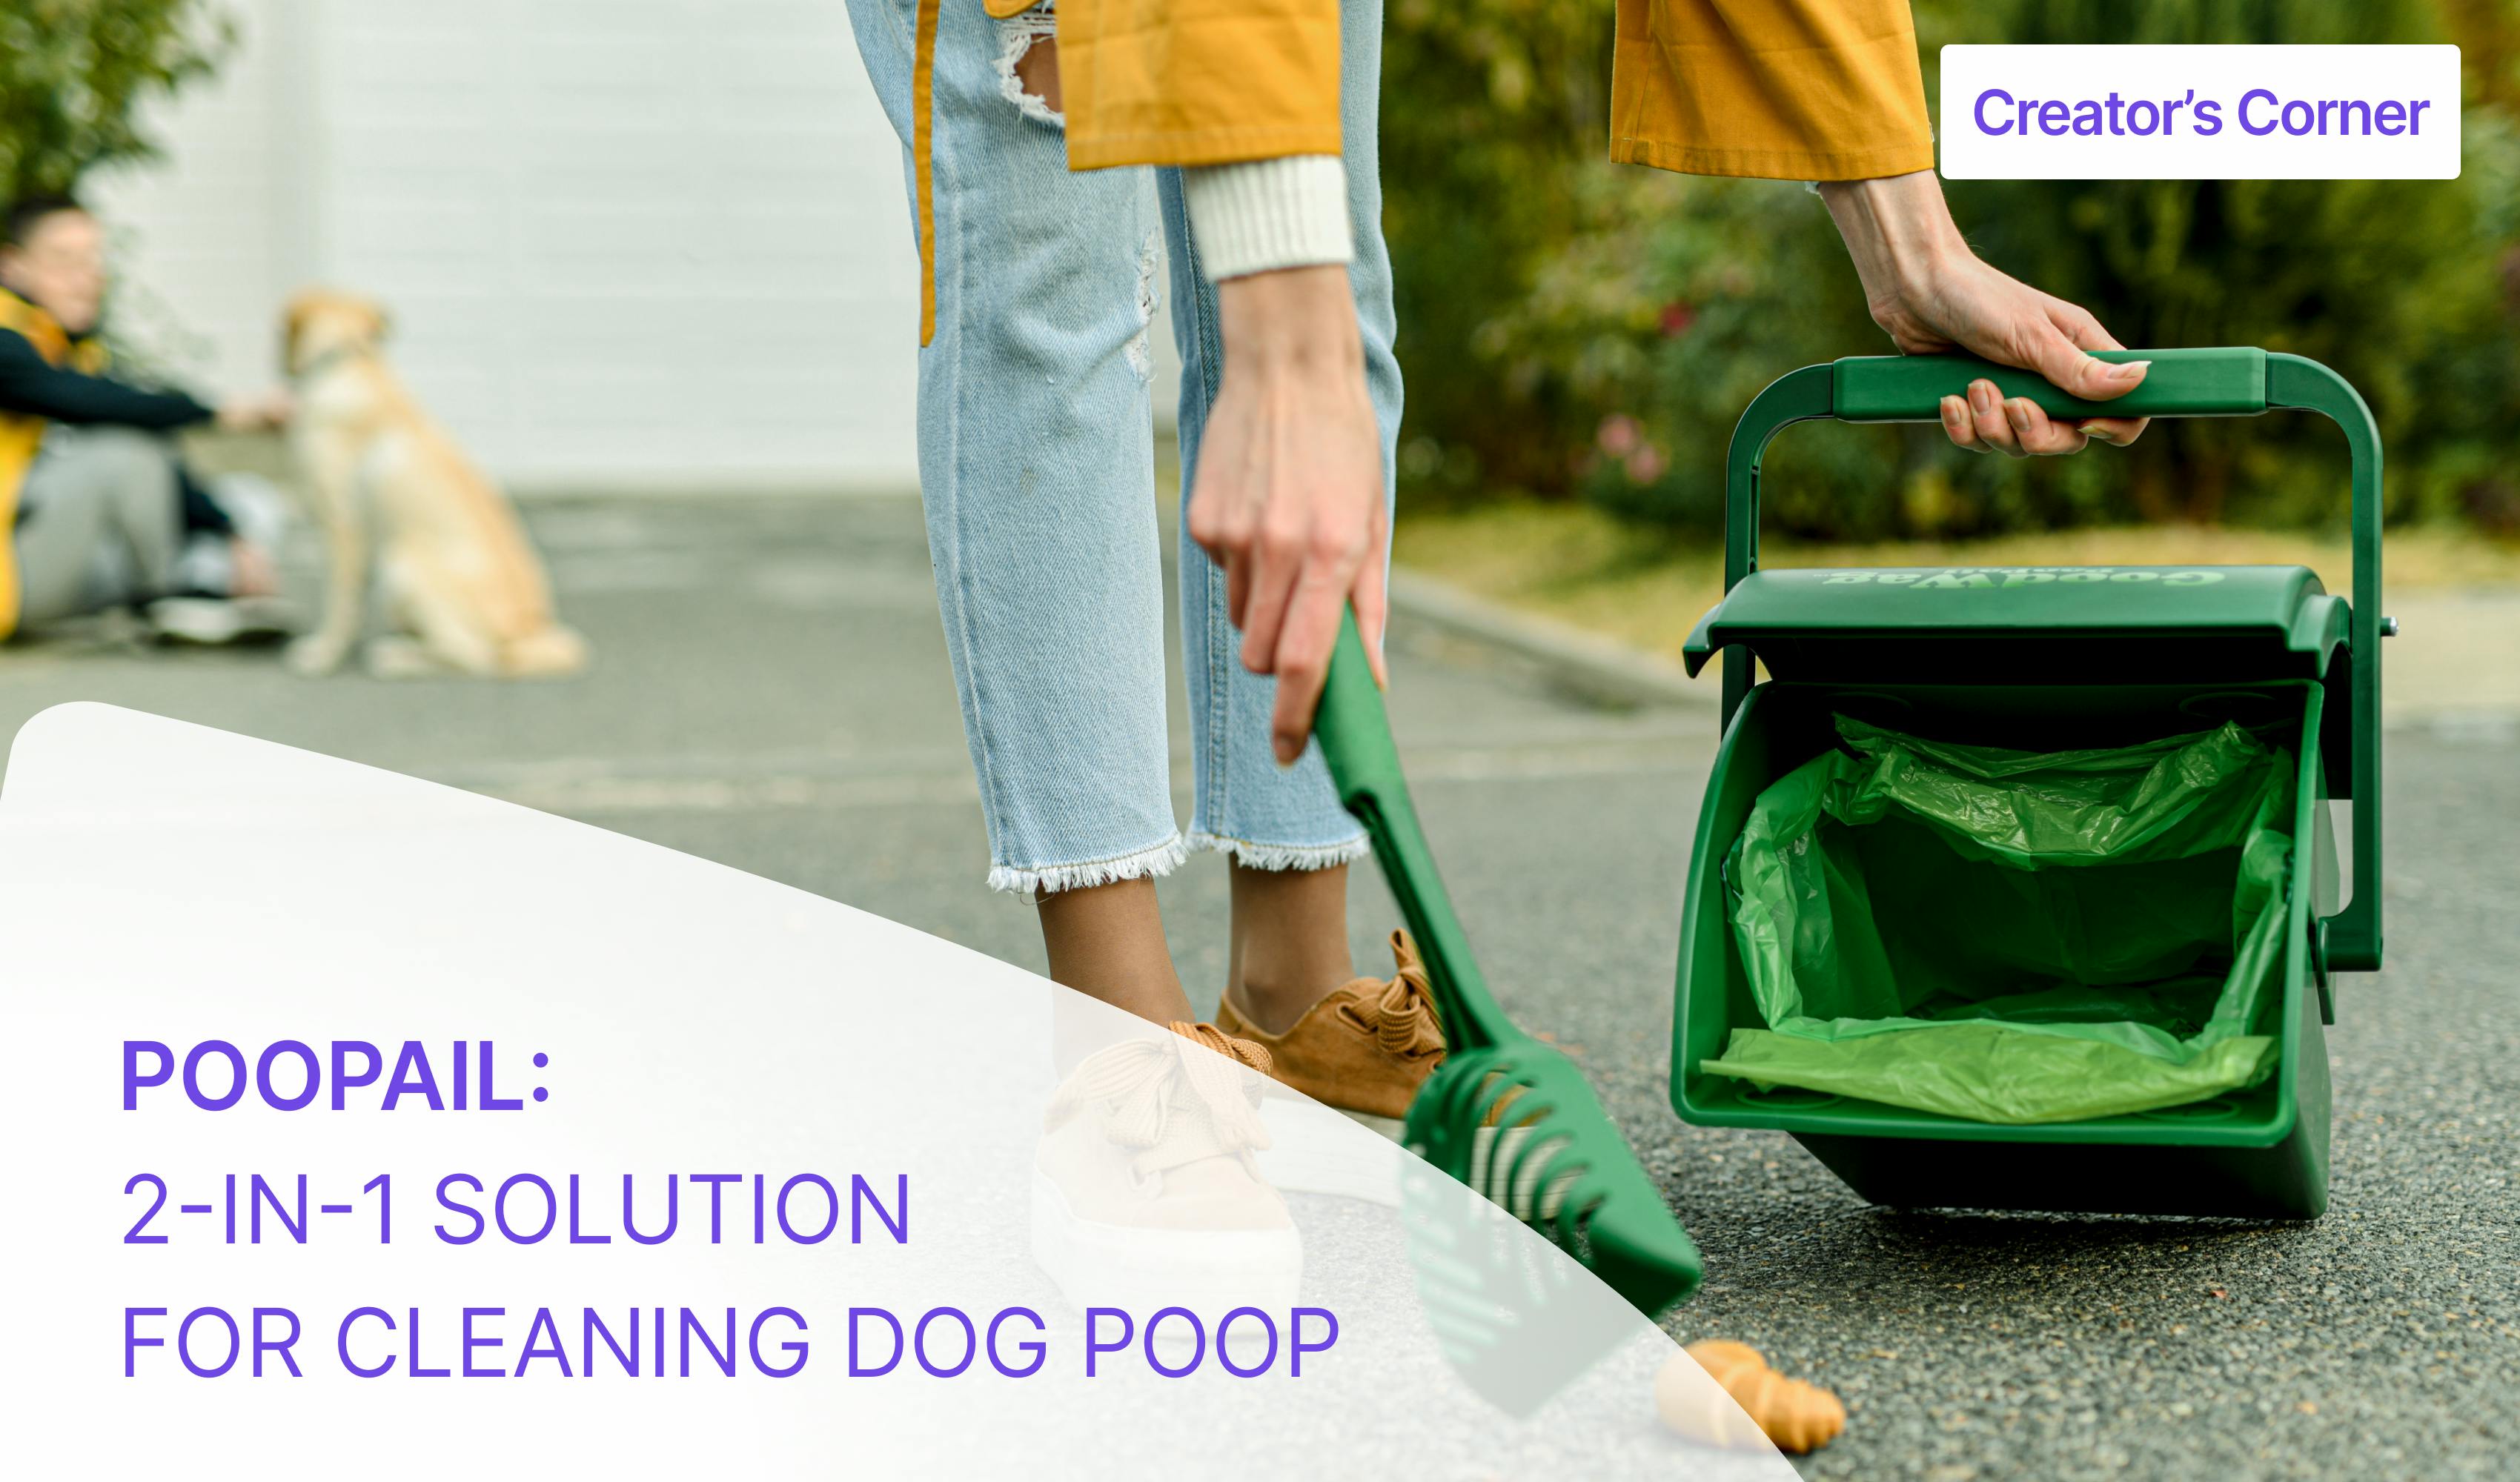 PooPail - 2-in-1 System for Scooping & Storing Dog Poop